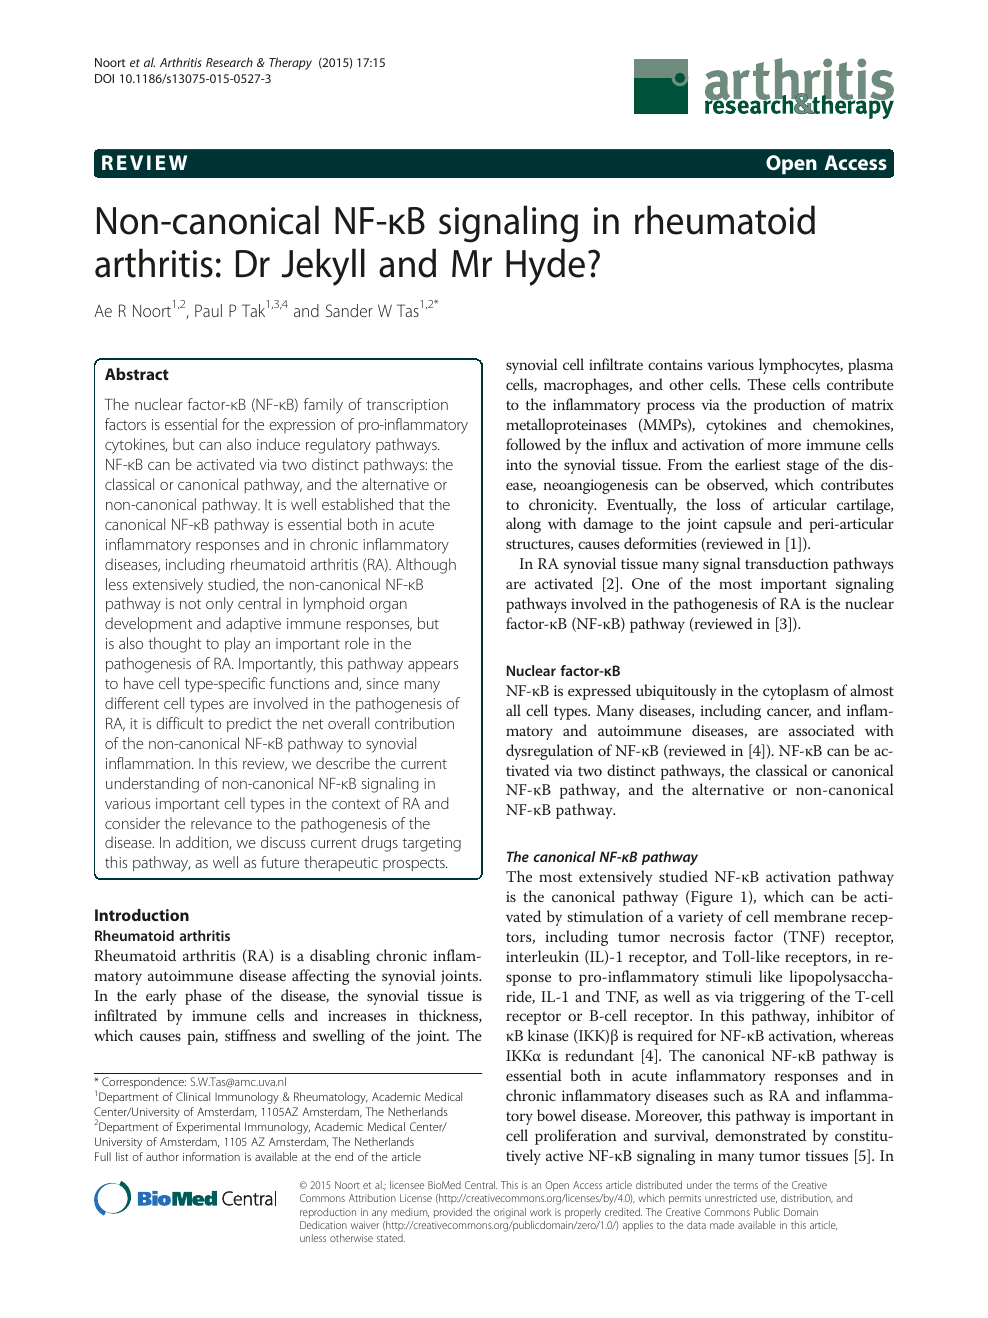 Non Canonical Nf Kb Signaling In Rheumatoid Arthritis Dr Jekyll And Mr Hyde Topic Of Research Paper In Biological Sciences Download Scholarly Article Pdf And Read For Free On Cyberleninka Open Science Hub